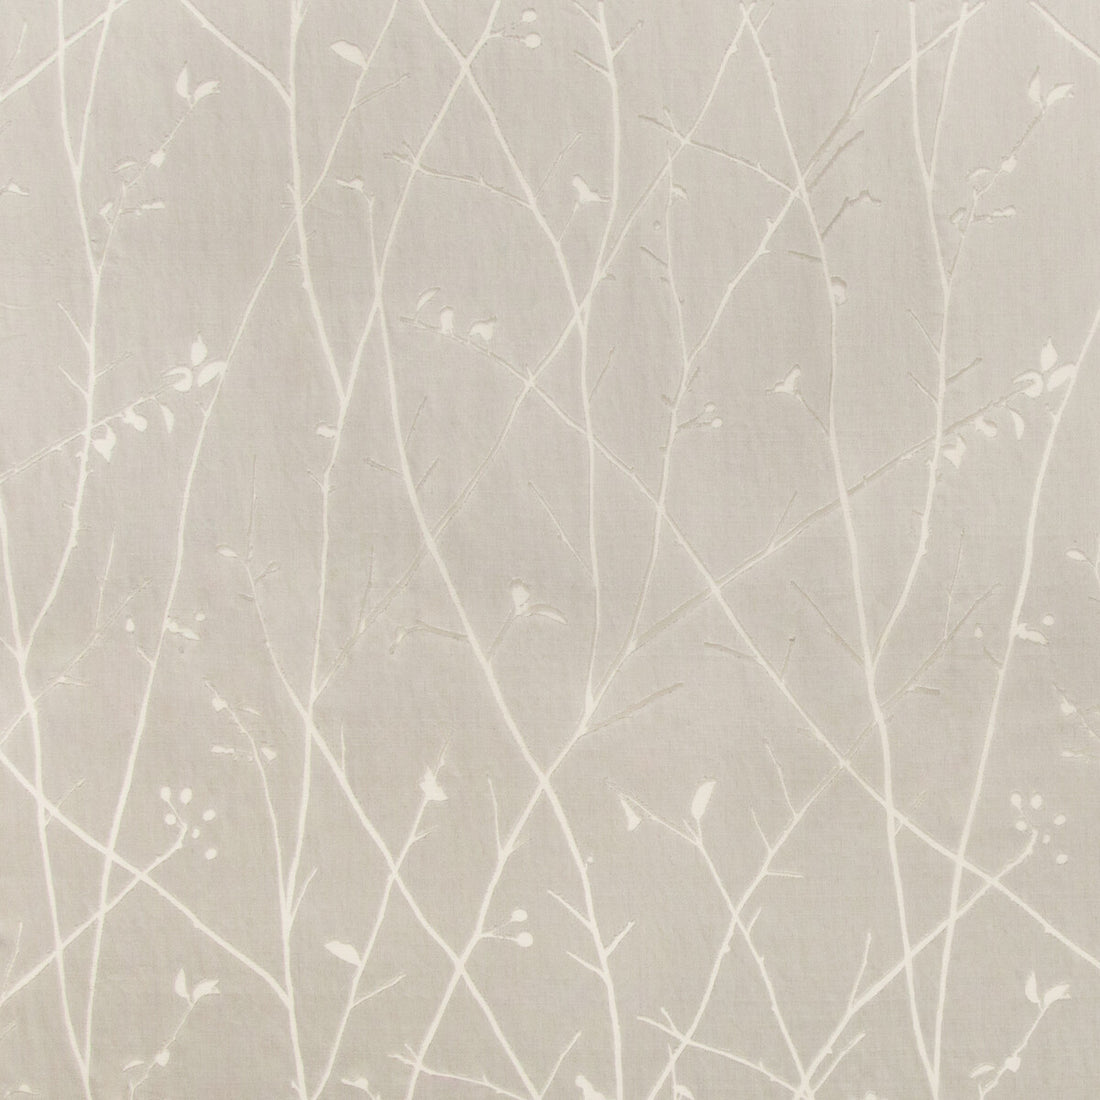 Ramus fabric in silver color - pattern 4463.11.0 - by Kravet Couture in the Sue Firestone Malibu collection